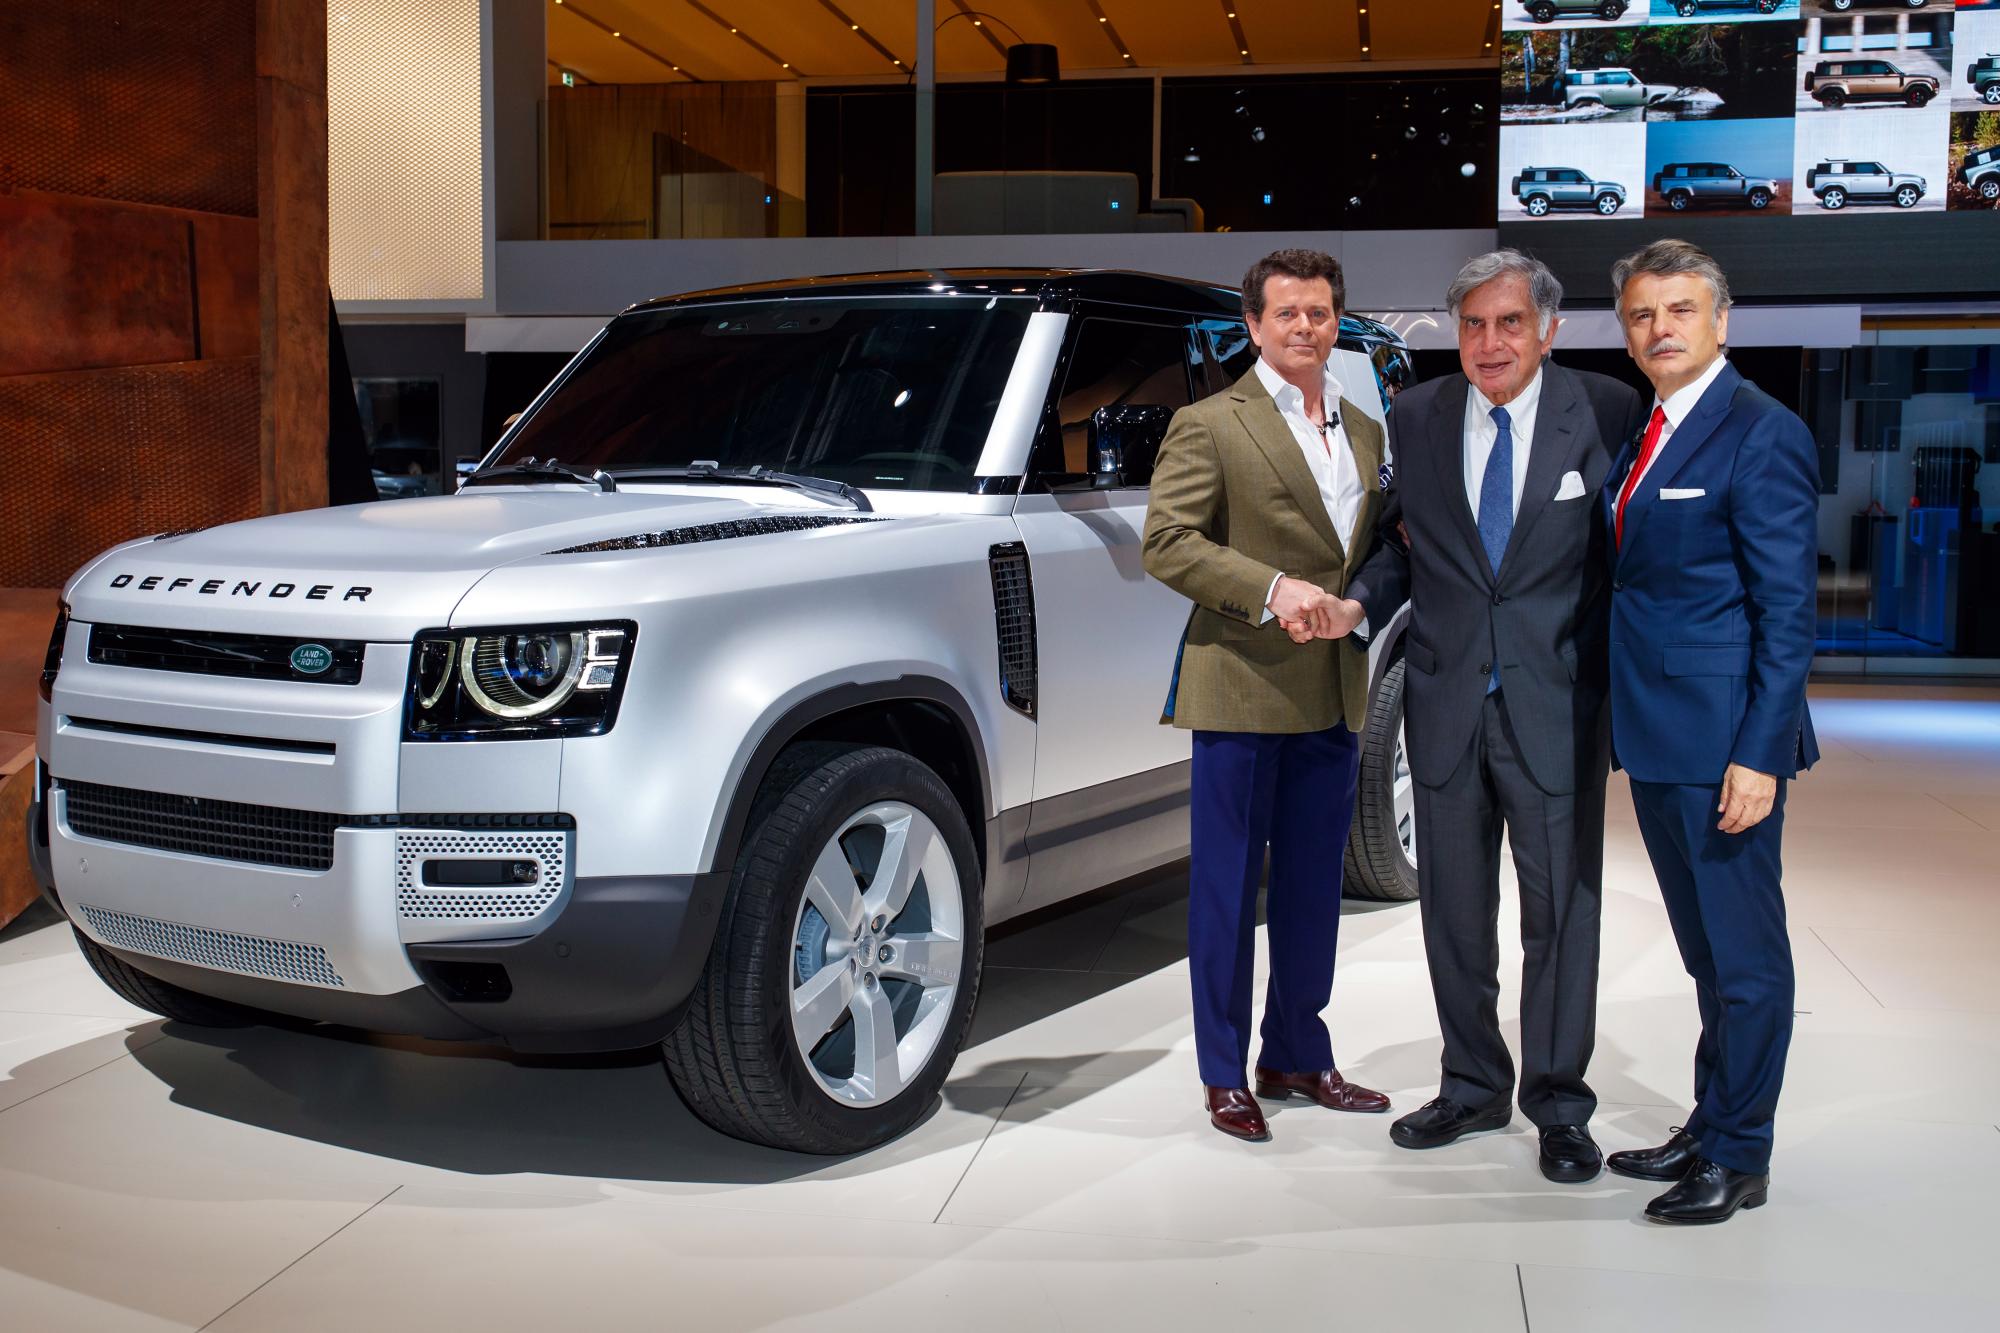 2020 Land Rover Defender launched in India, priced from INR 69.99 lakh